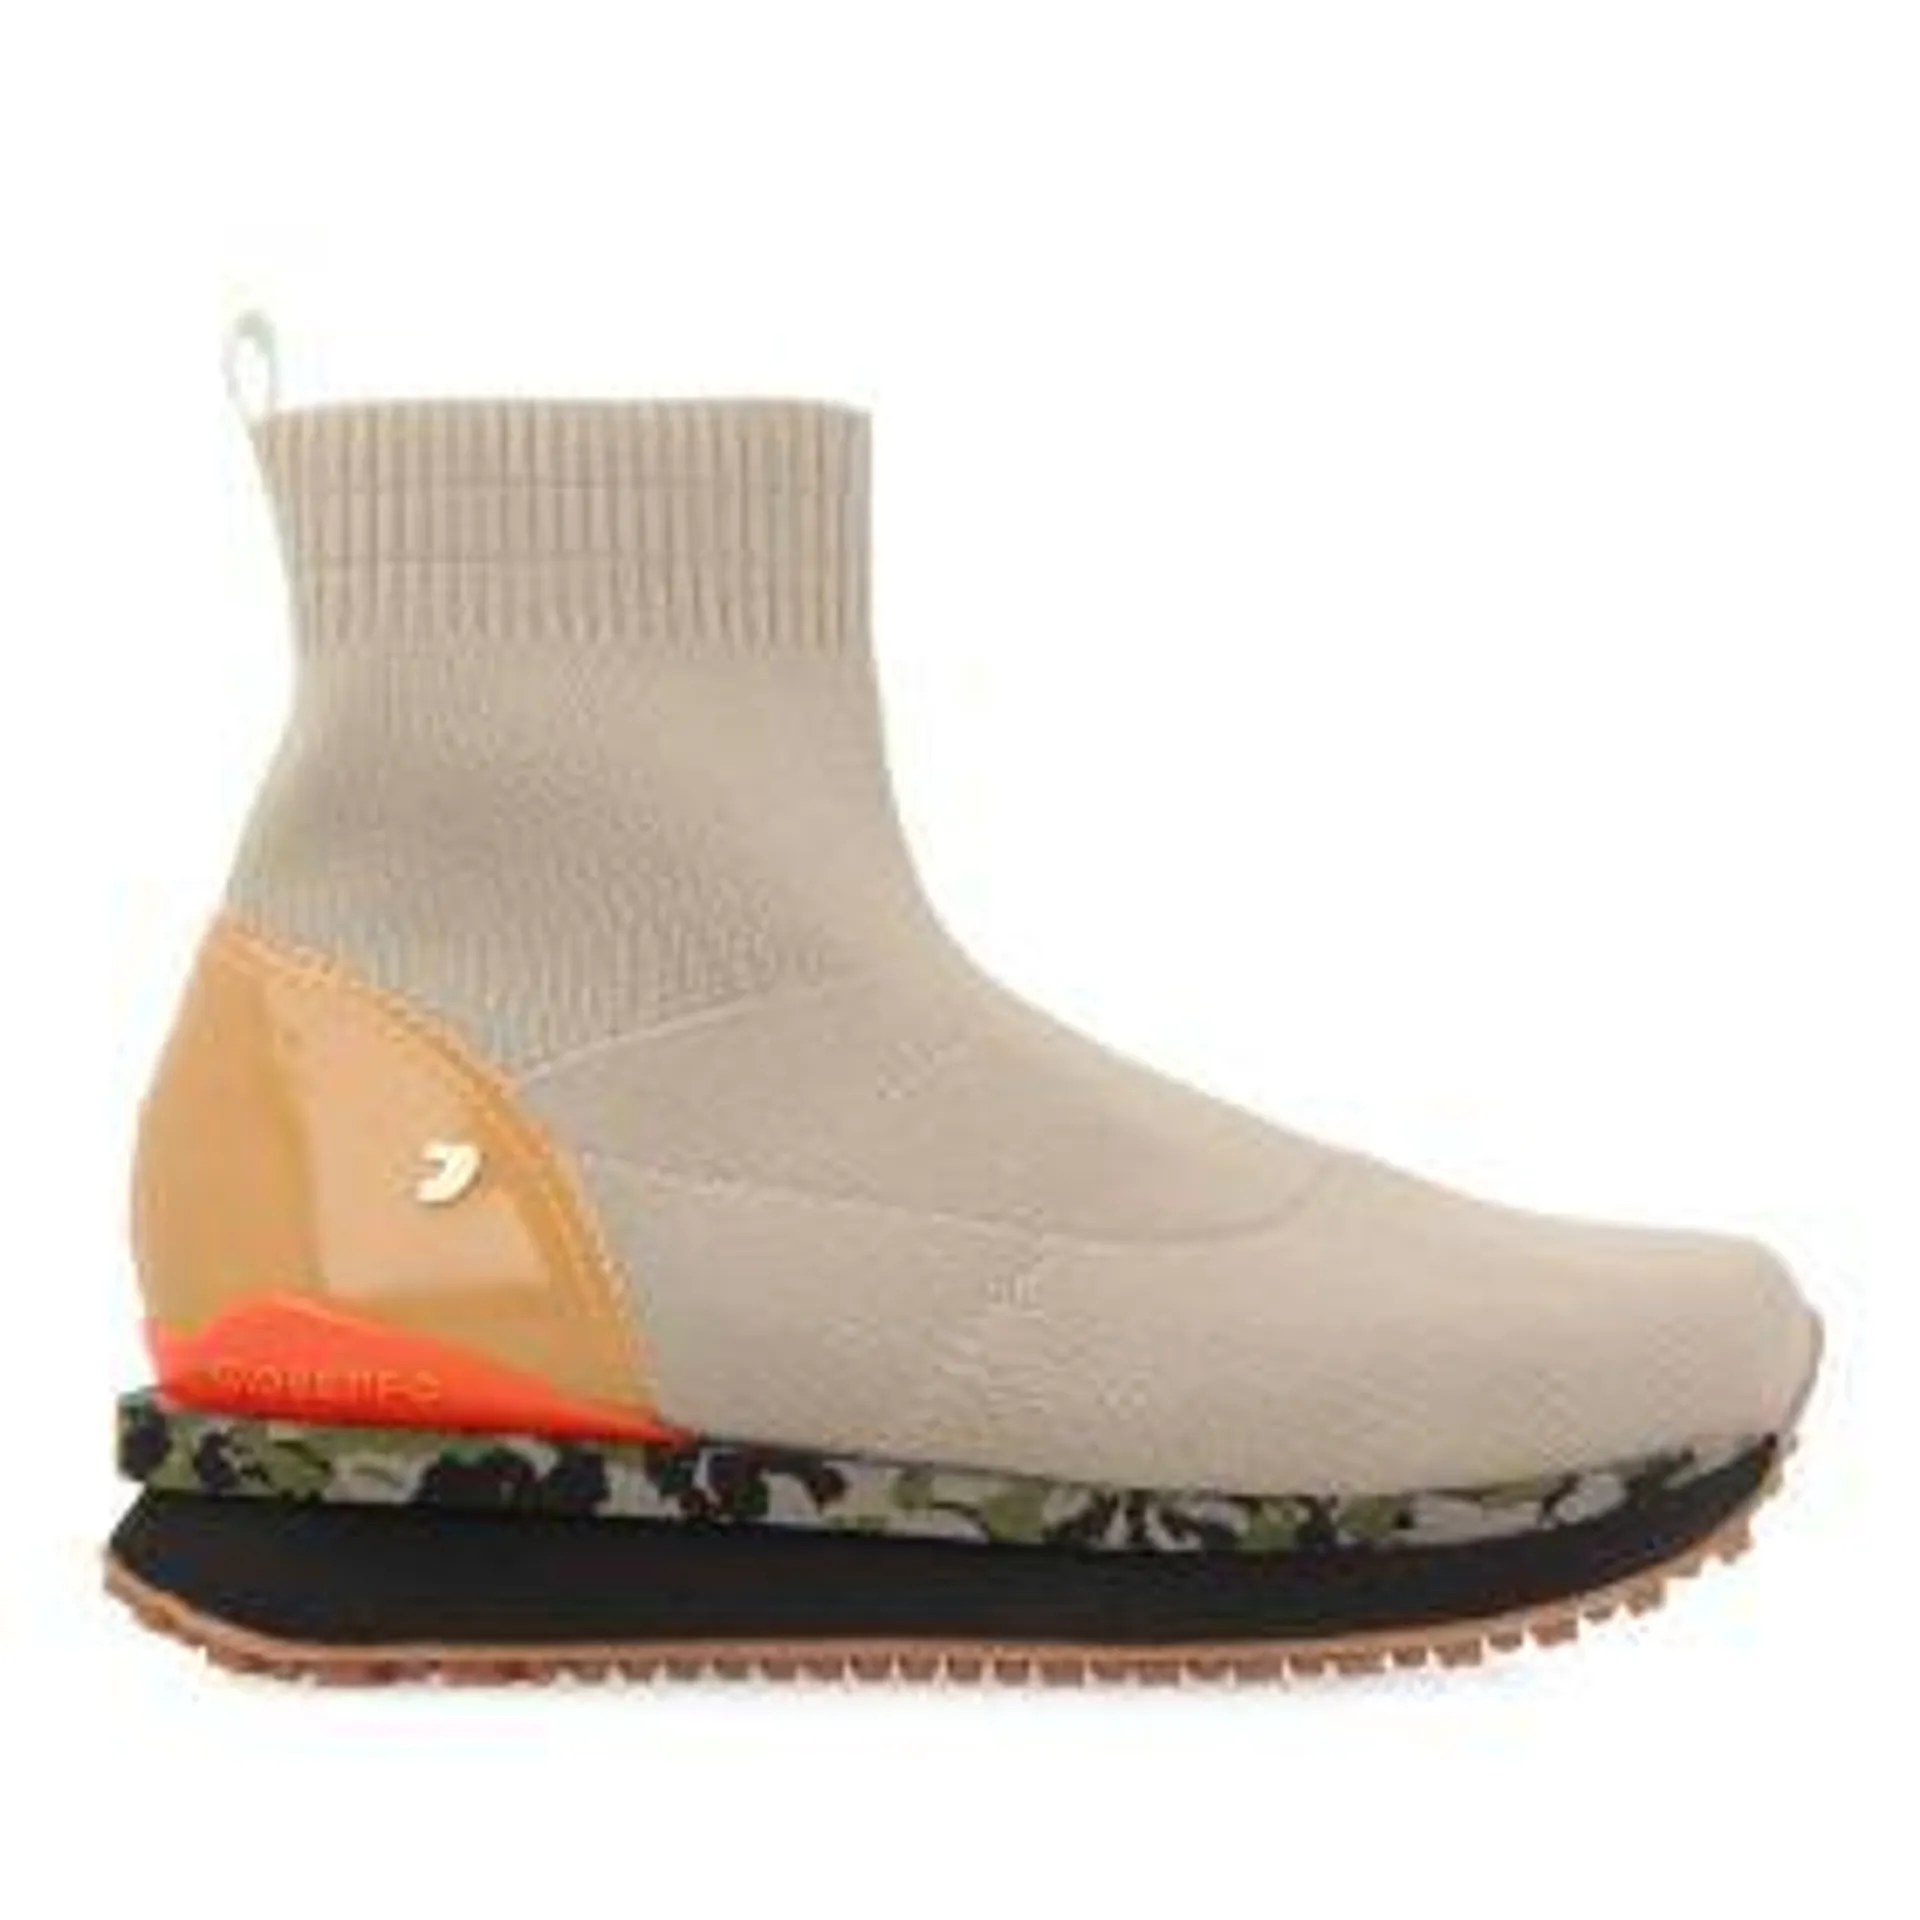 Kehra women's camouflage sock-style sneakers with adjustable straps and details in orange, gold, beige and mint green